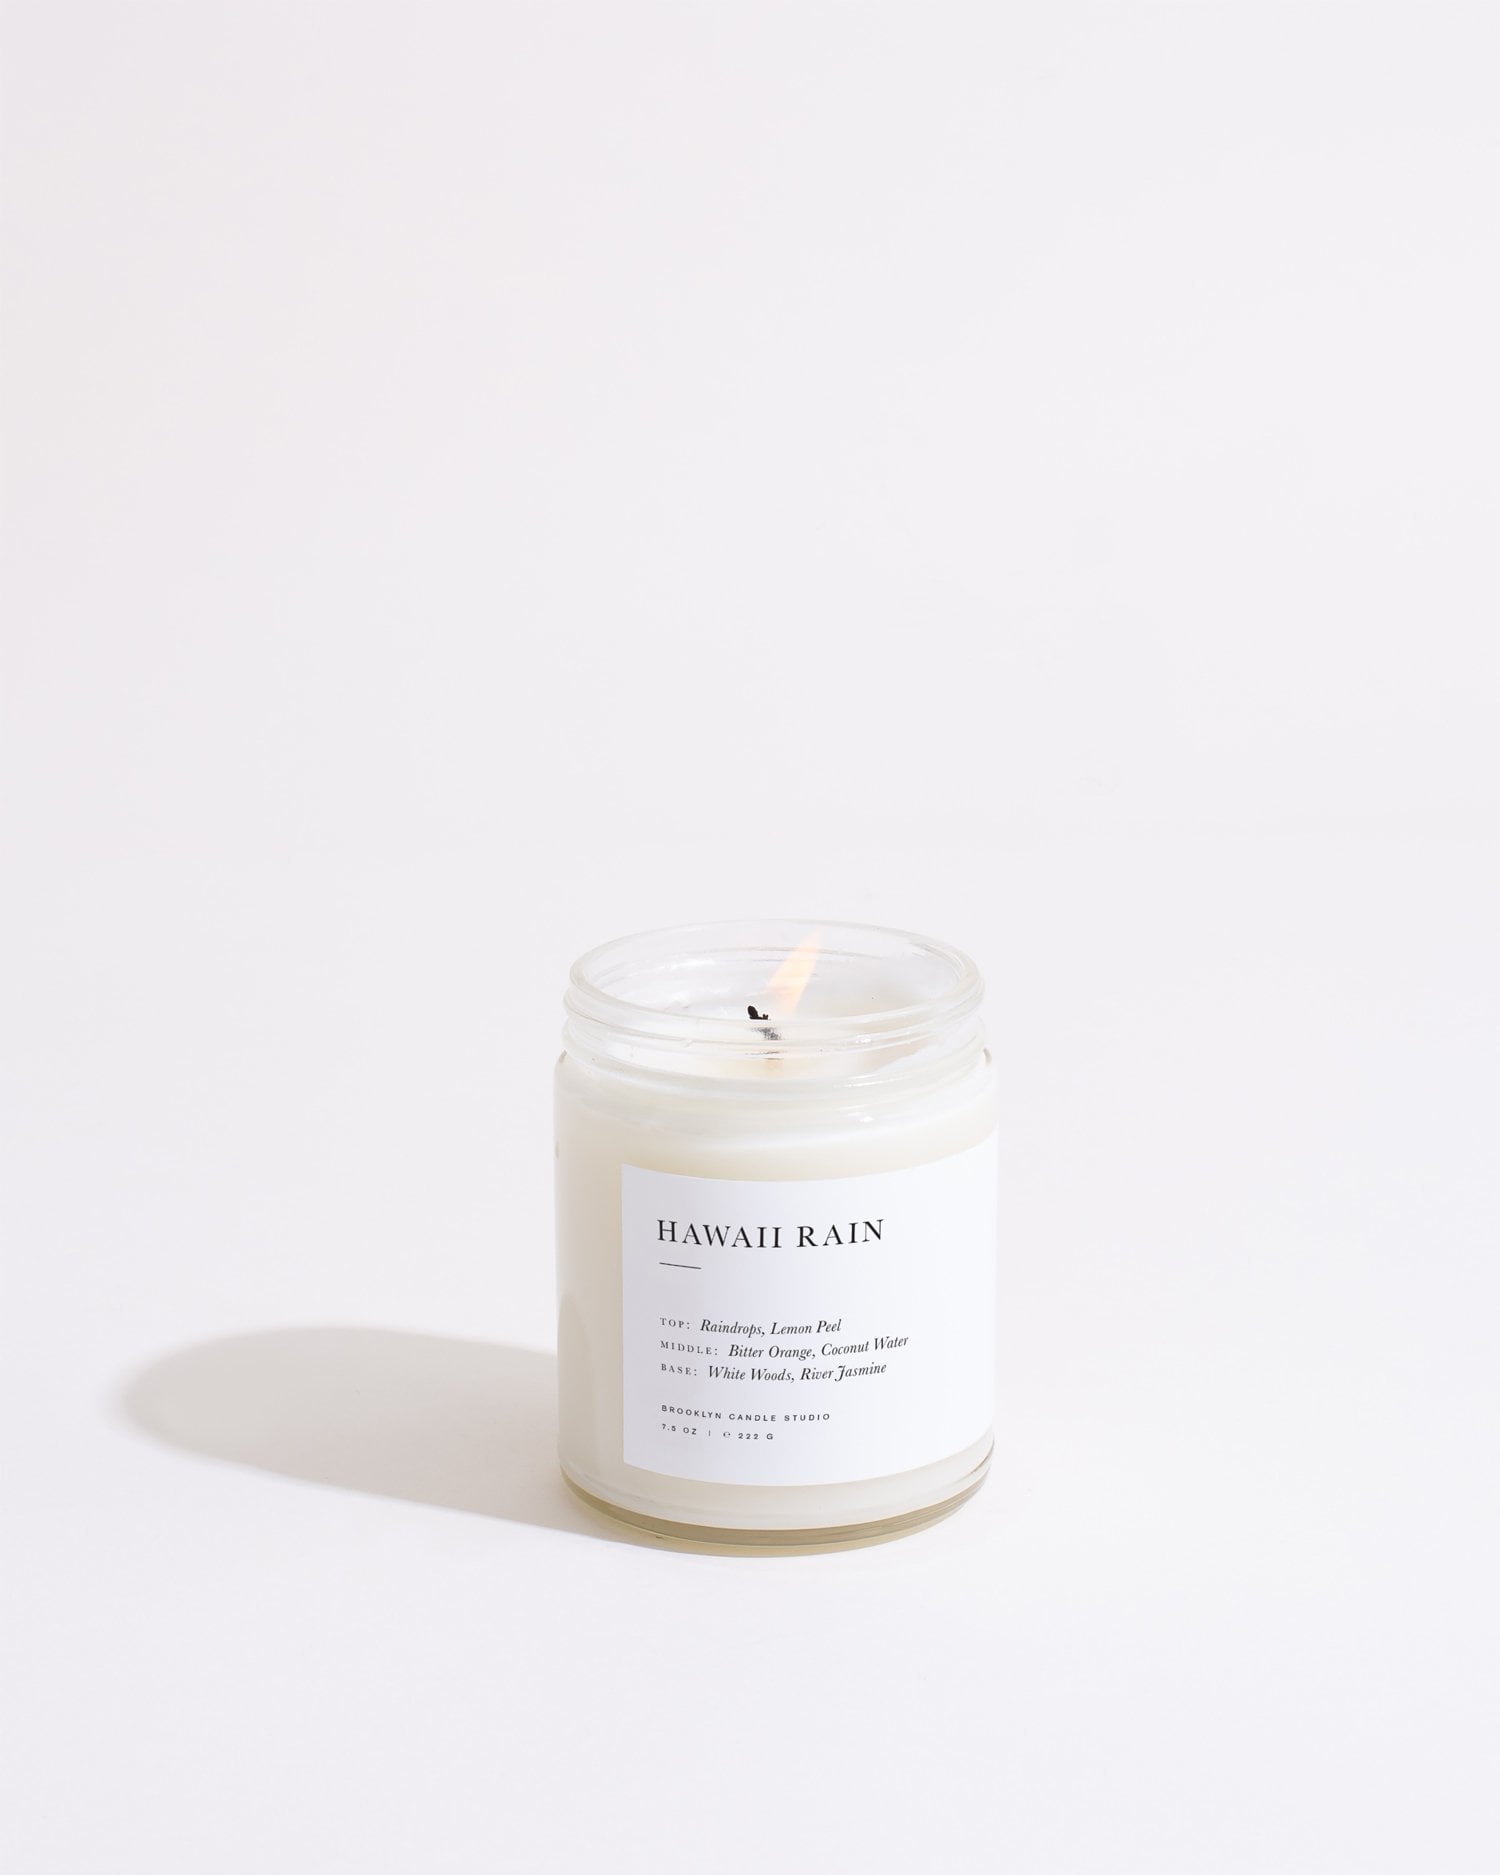 A lit white candle in a clear glass jar is centered against a light background. The label on the jar reads "Hawaii Rain Minimalist Candle" by Brooklyn Candle Studio, featuring scent notes of raindrops, lemon peel, and white tea. Made from soy wax, the flame casts a subtle glow and shadow around the candle.